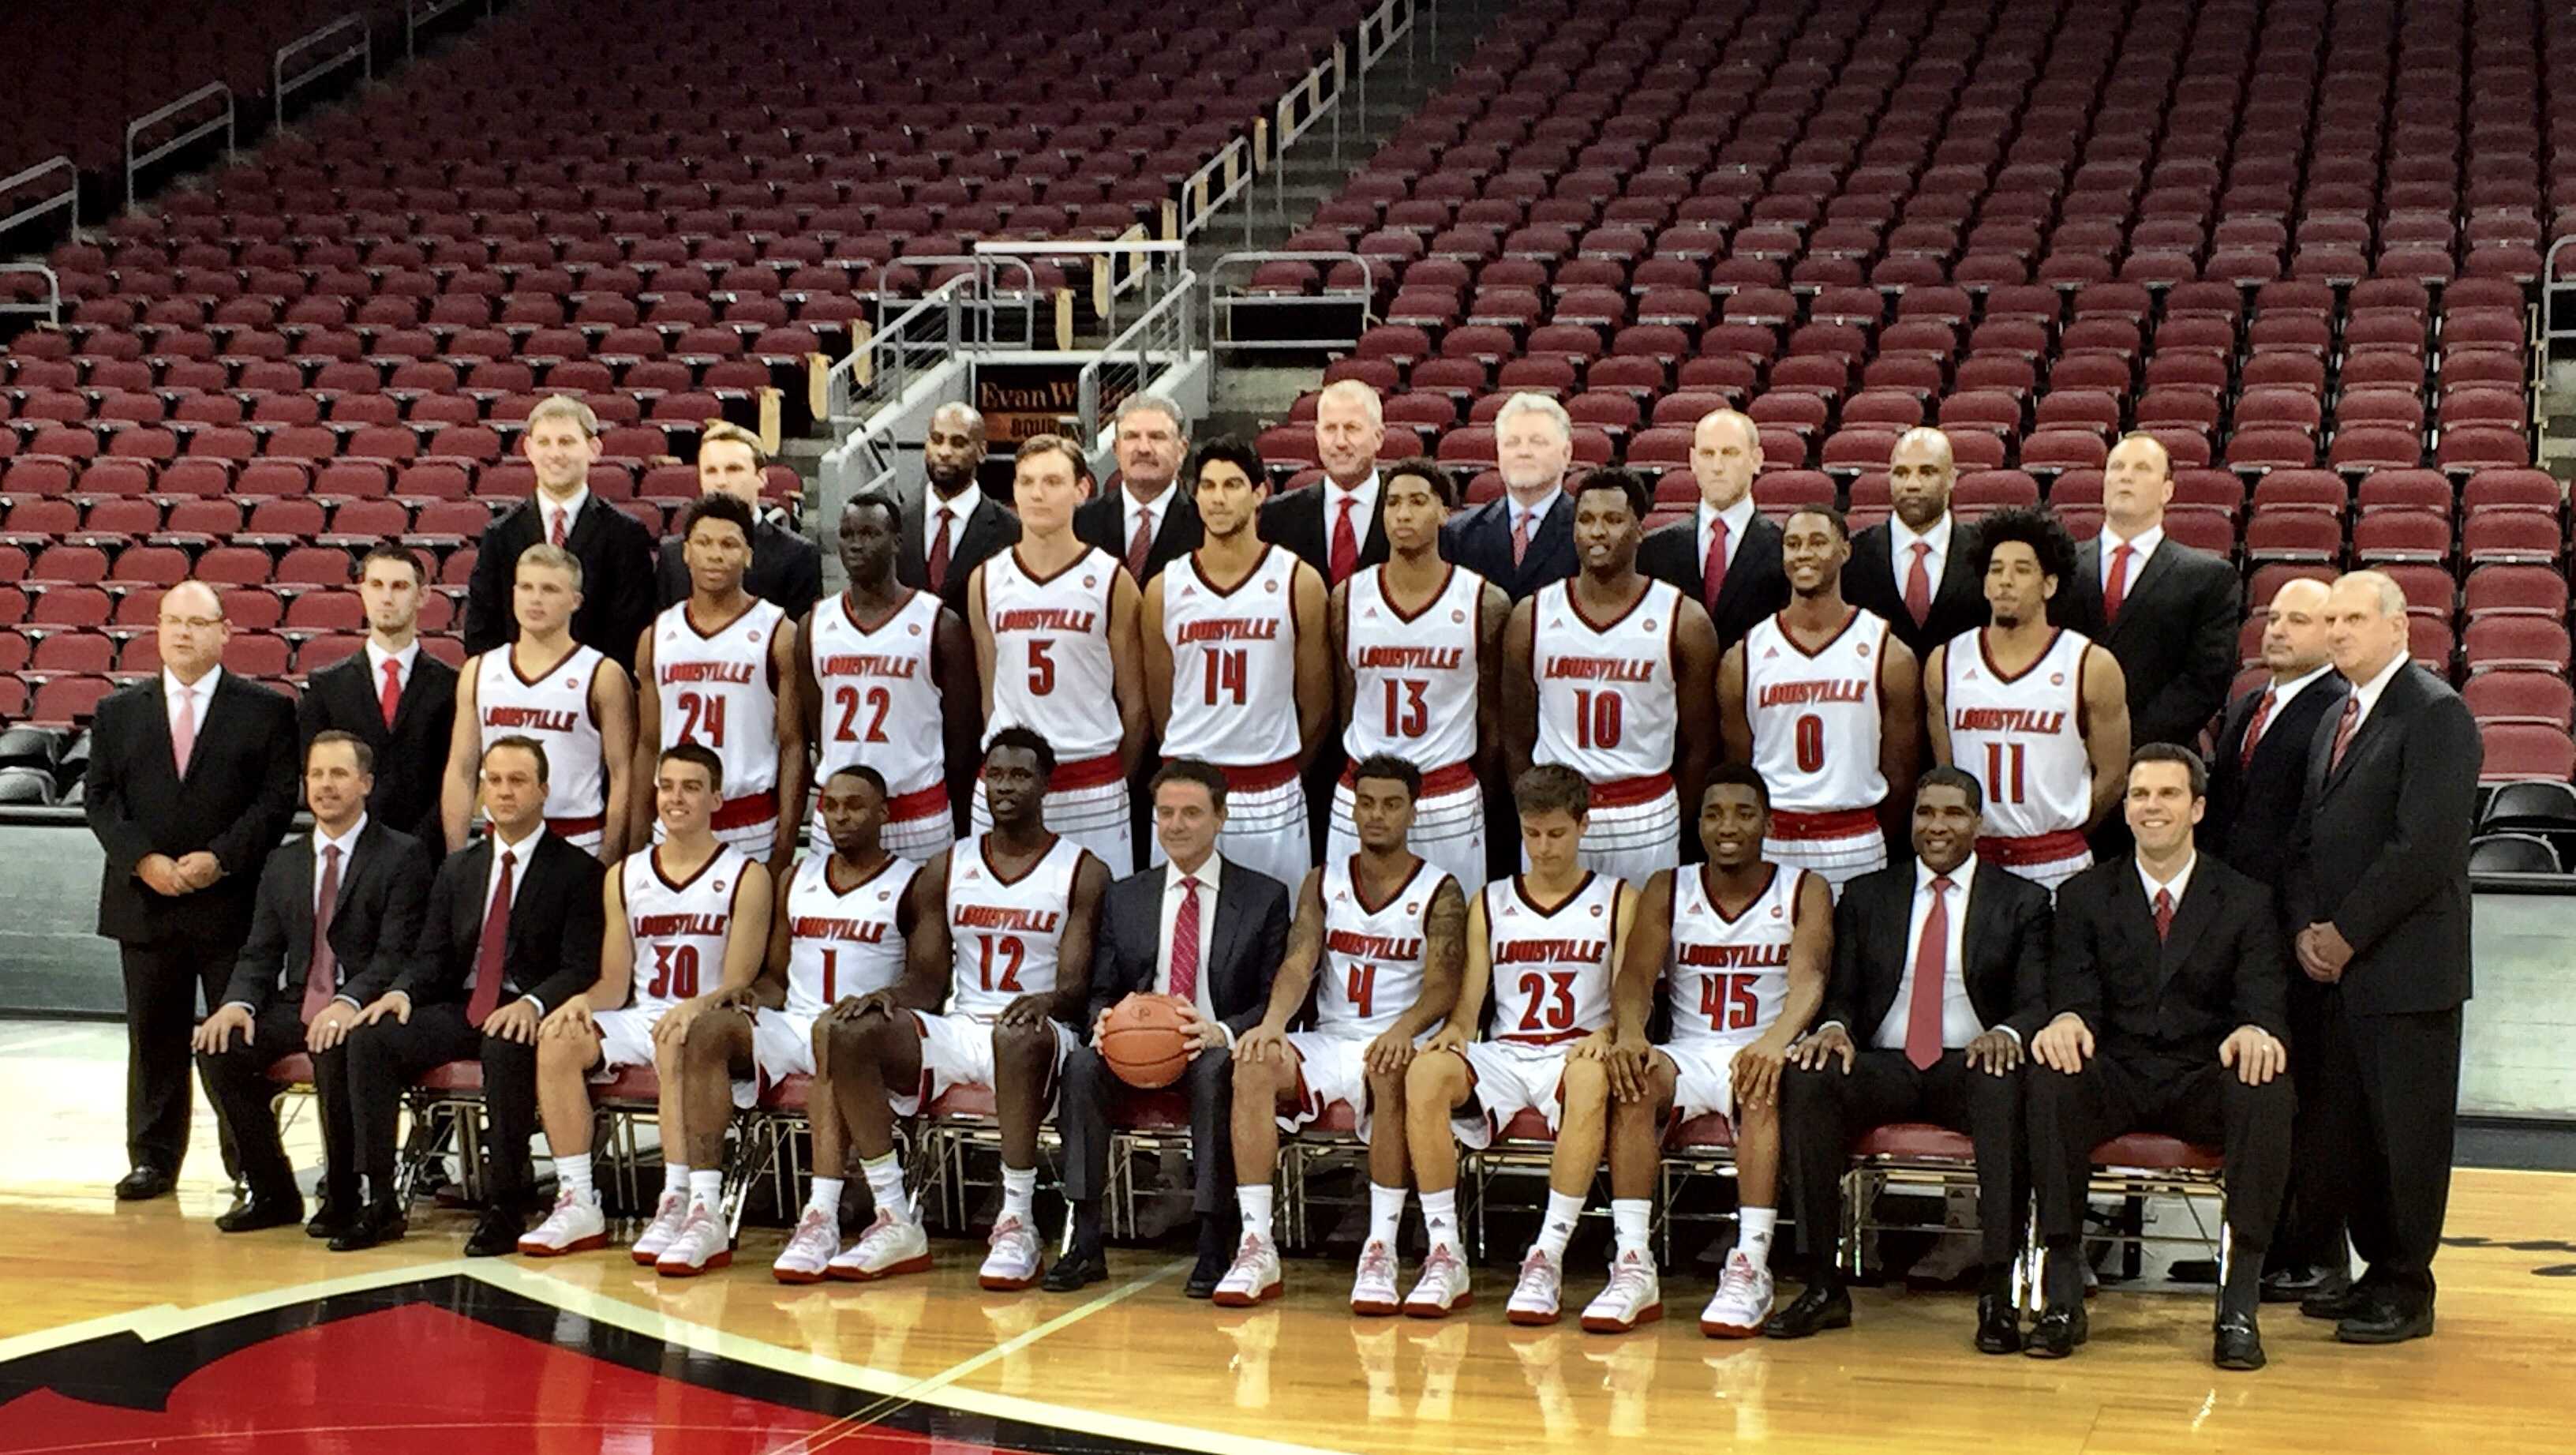 Why Louisville basketball hasn't turned to more full-court pressure